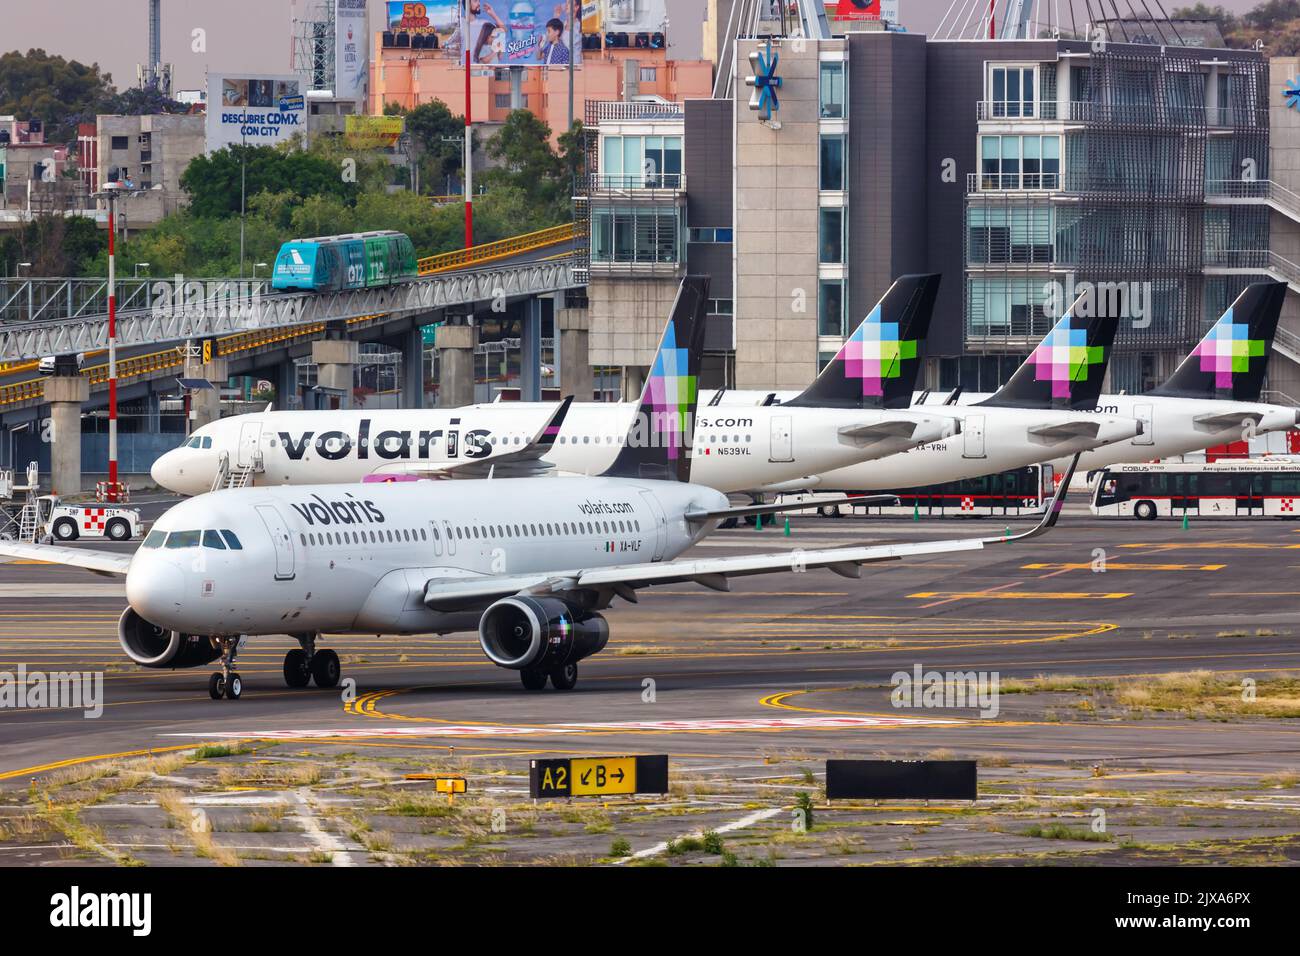 Mexico City, Mexico - April 14, 2022: Volaris Airbus A320 airplanes at Mexico City airport (MEX) in Mexico. Stock Photo